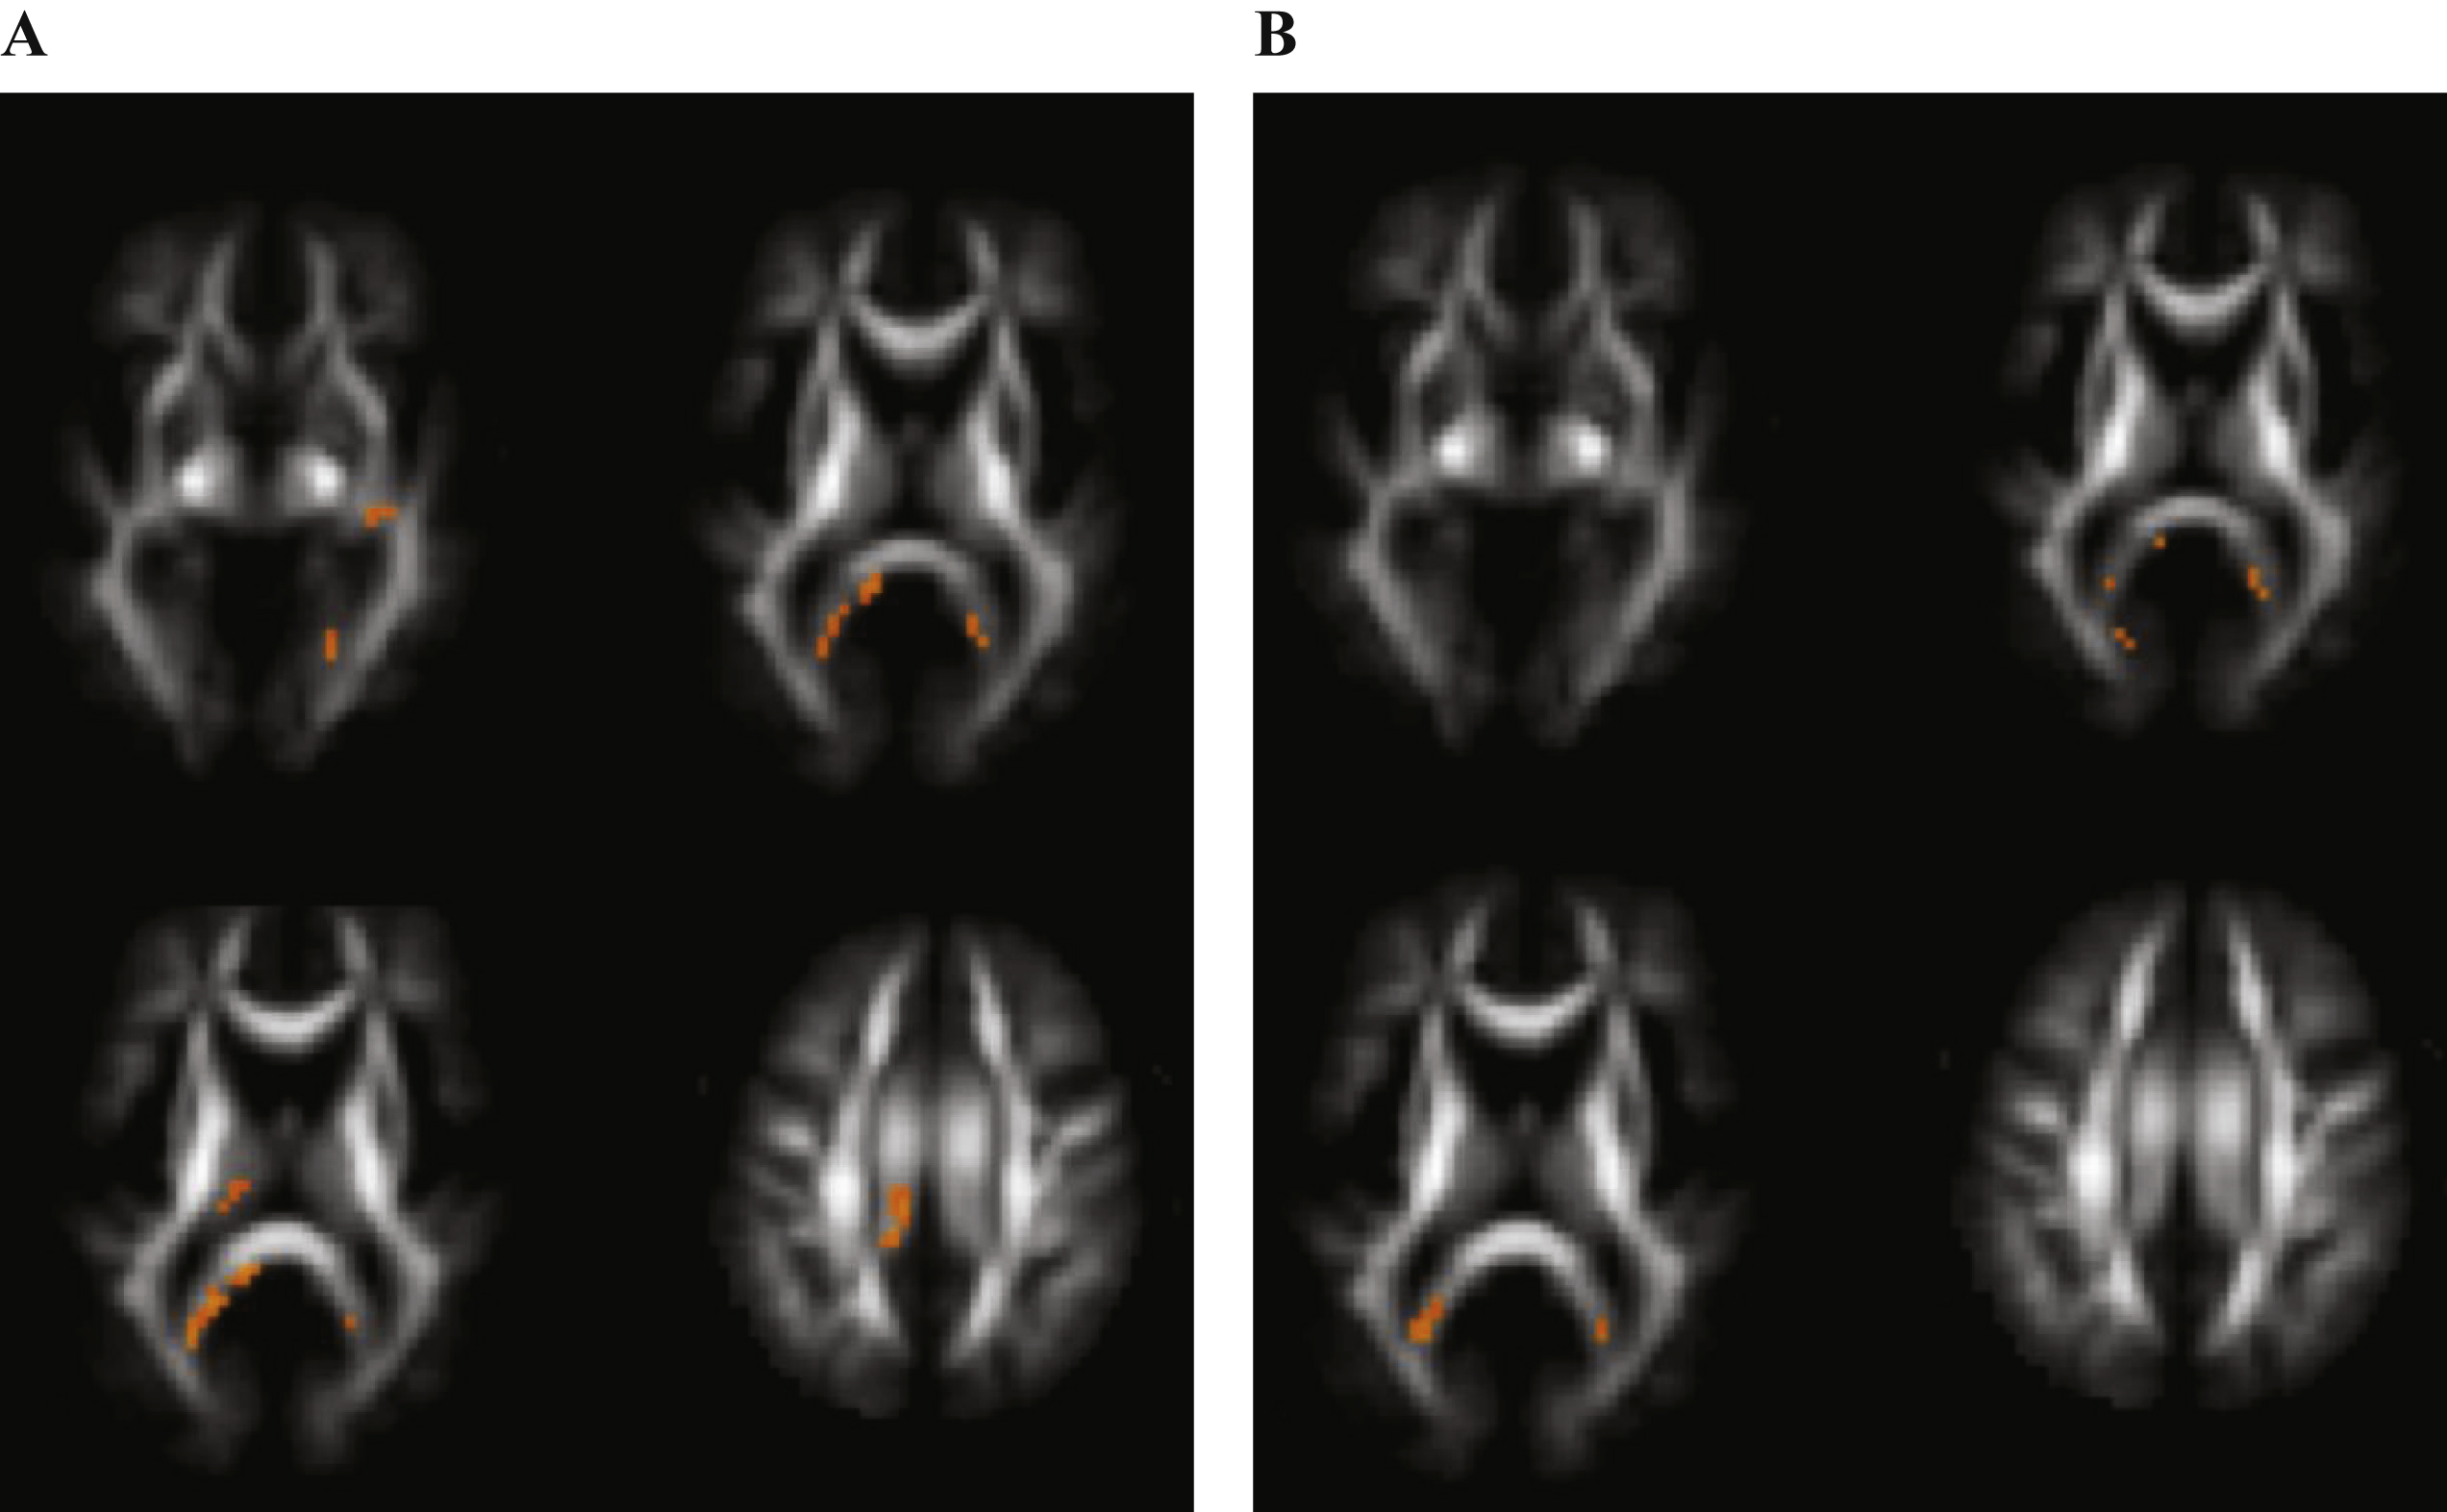 Voxels reaching statistical significance (p <  0.05) after FWE correction on whole-brain level for multiple comparison in Alzheimer’s disease versus control subjects at a cluster threshold of 20. No differences were found in fractional anisotropy. A) Regions with increased mean diffusivity. B) Regions with decreased mean kurtosis.